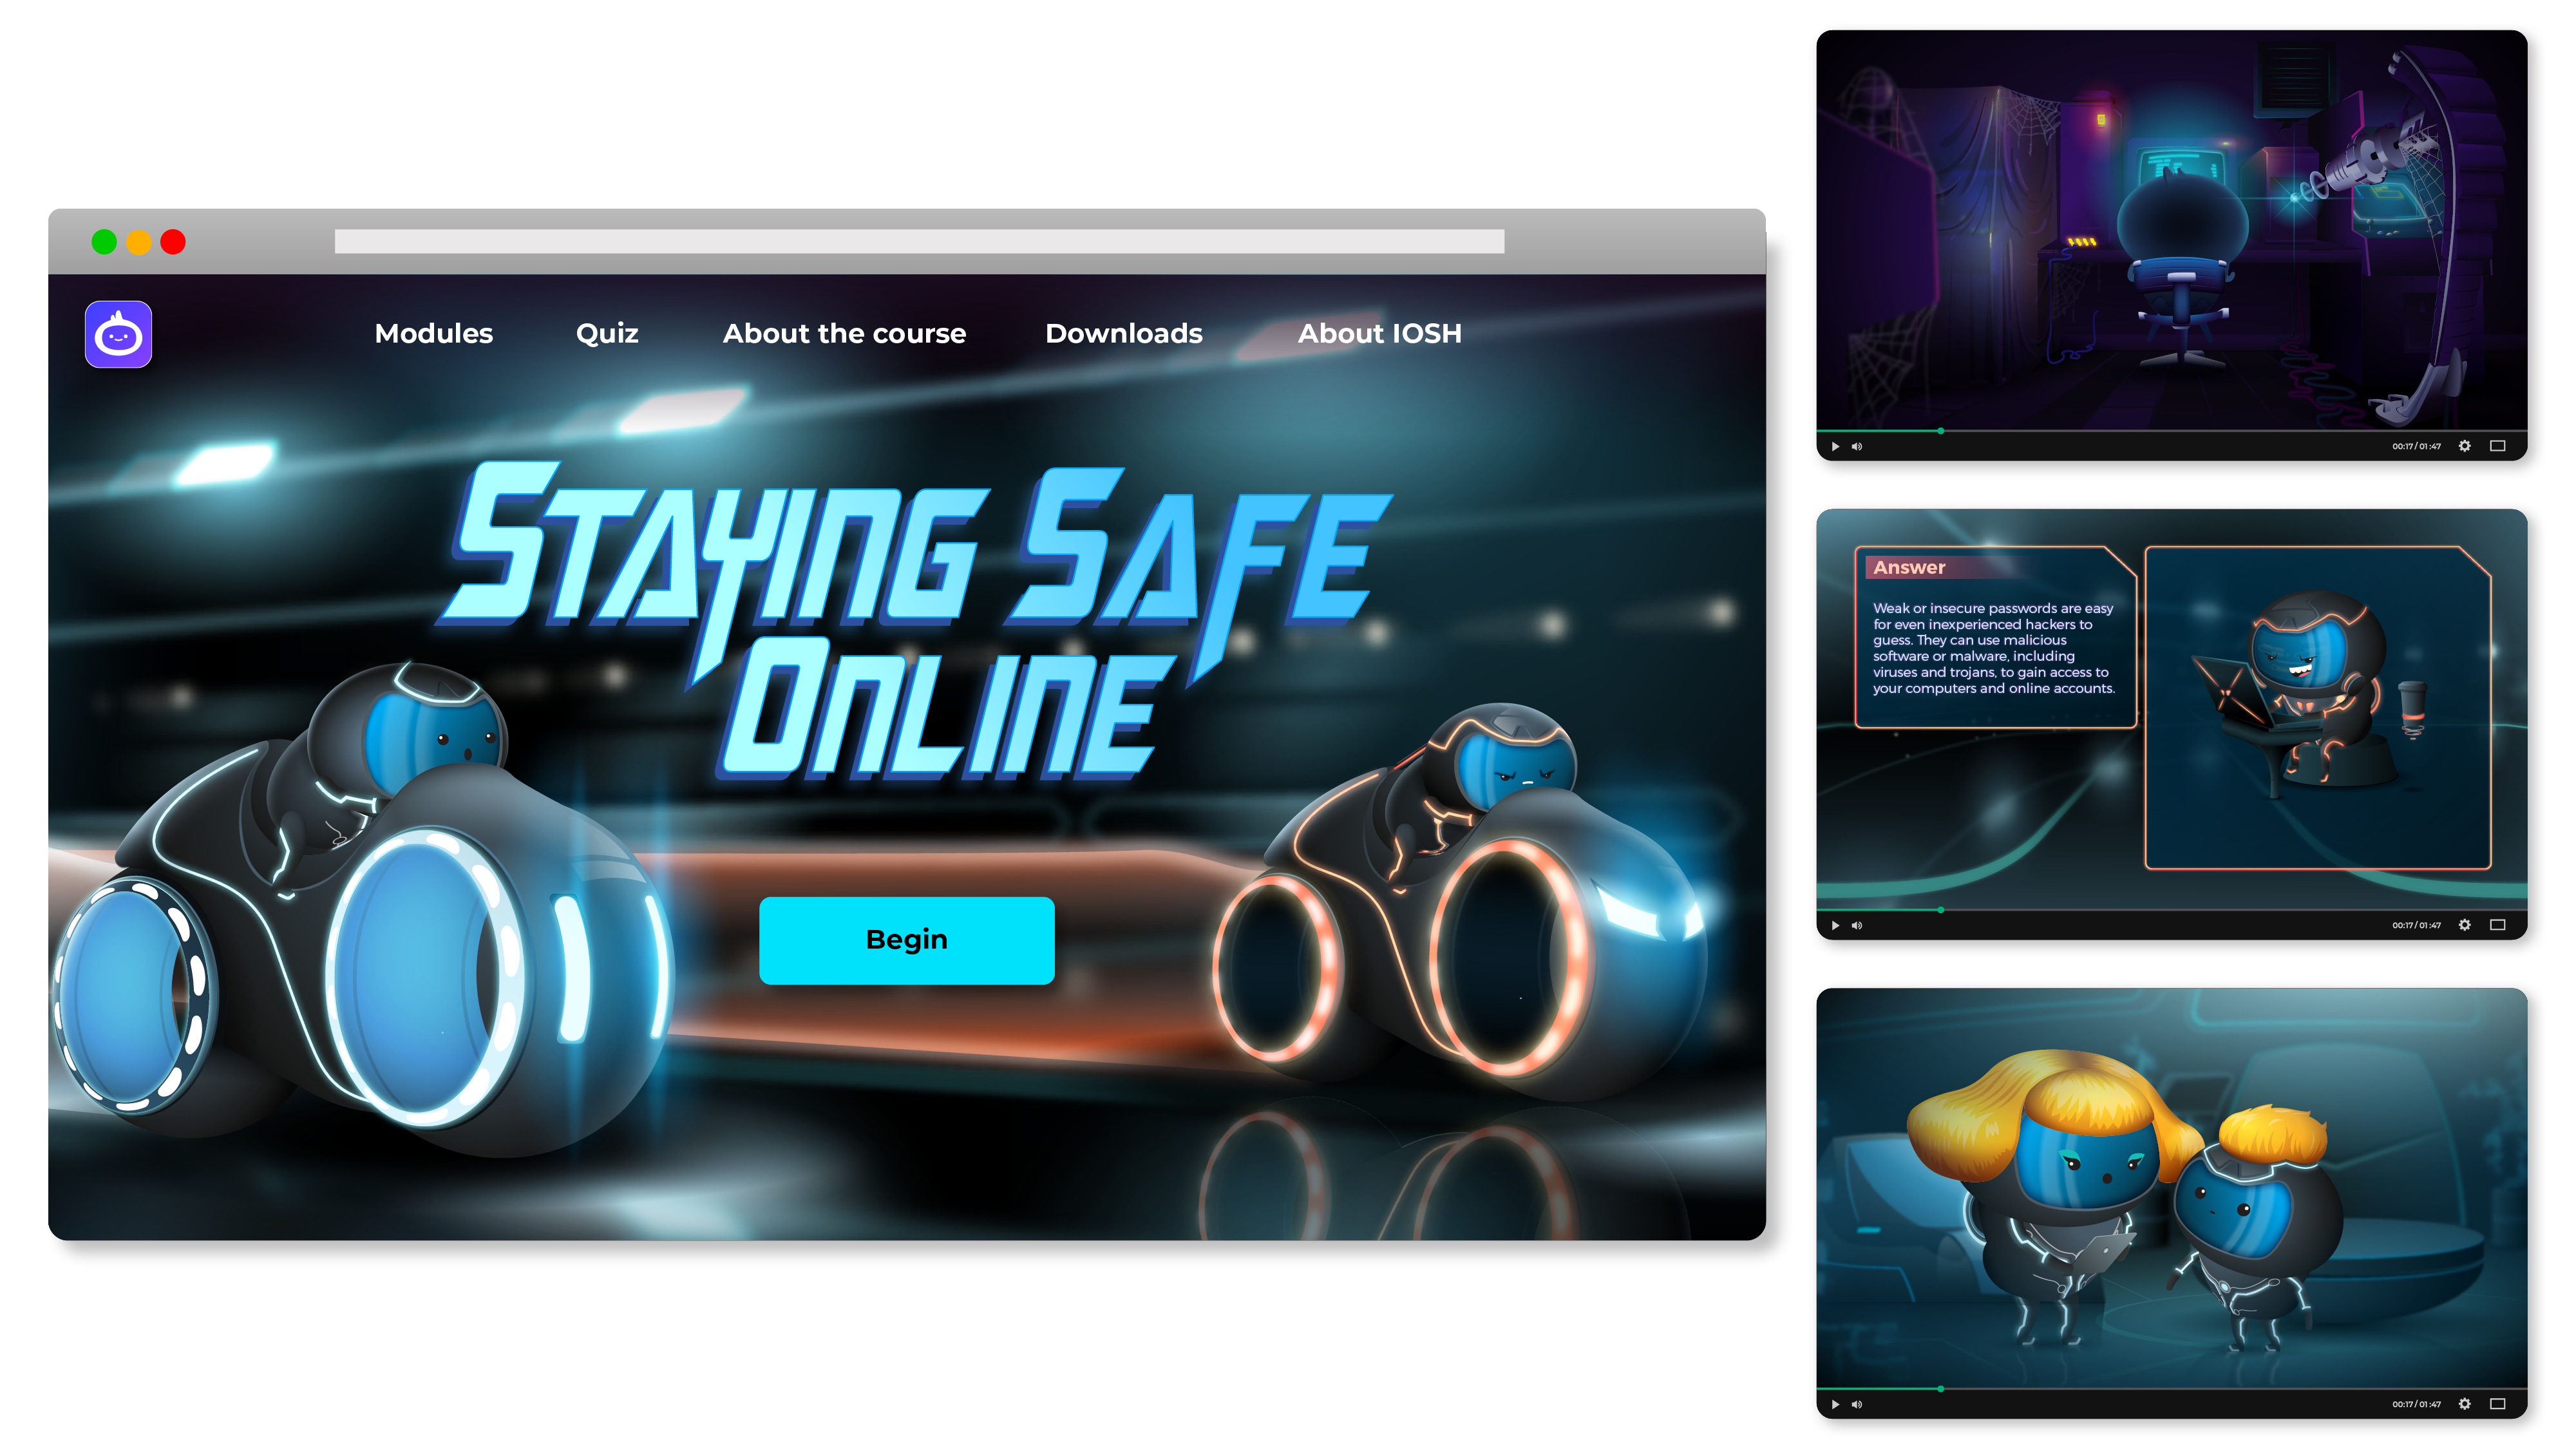 iAM Staying Safe Online Landing Page